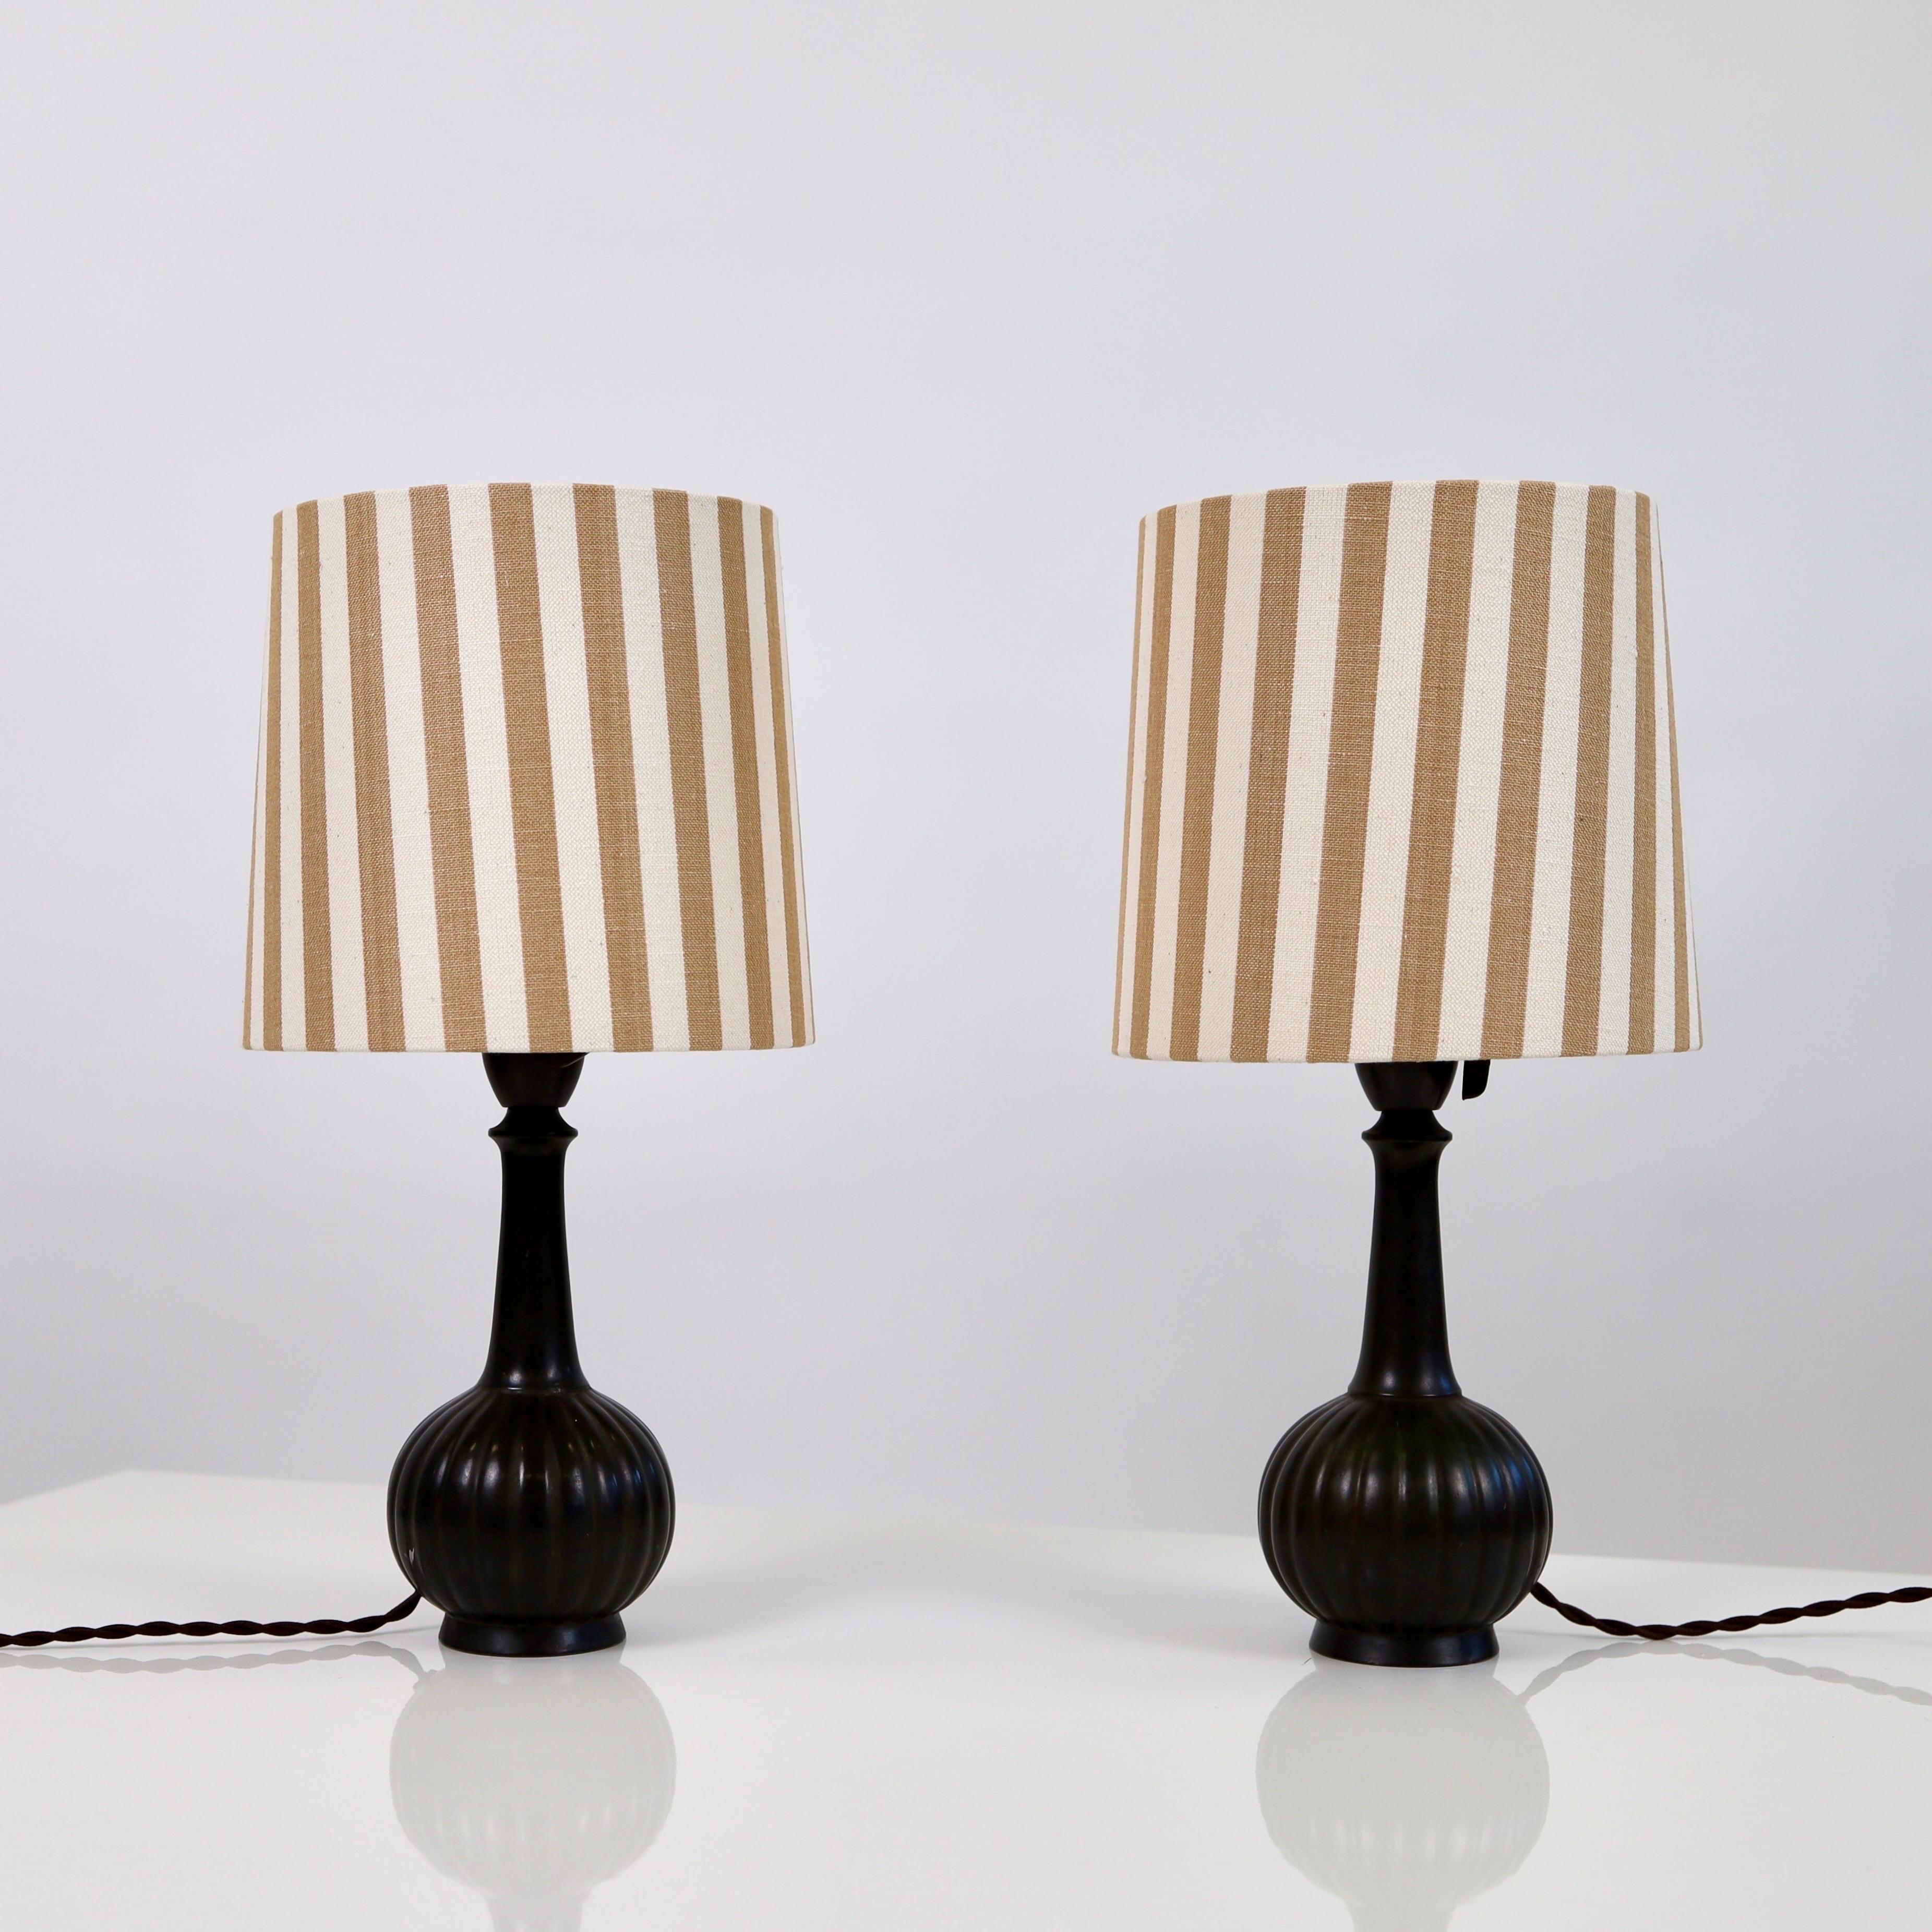 Early 20th Century Set of Just Andersen Desk Lamps, 1920s, Denmark